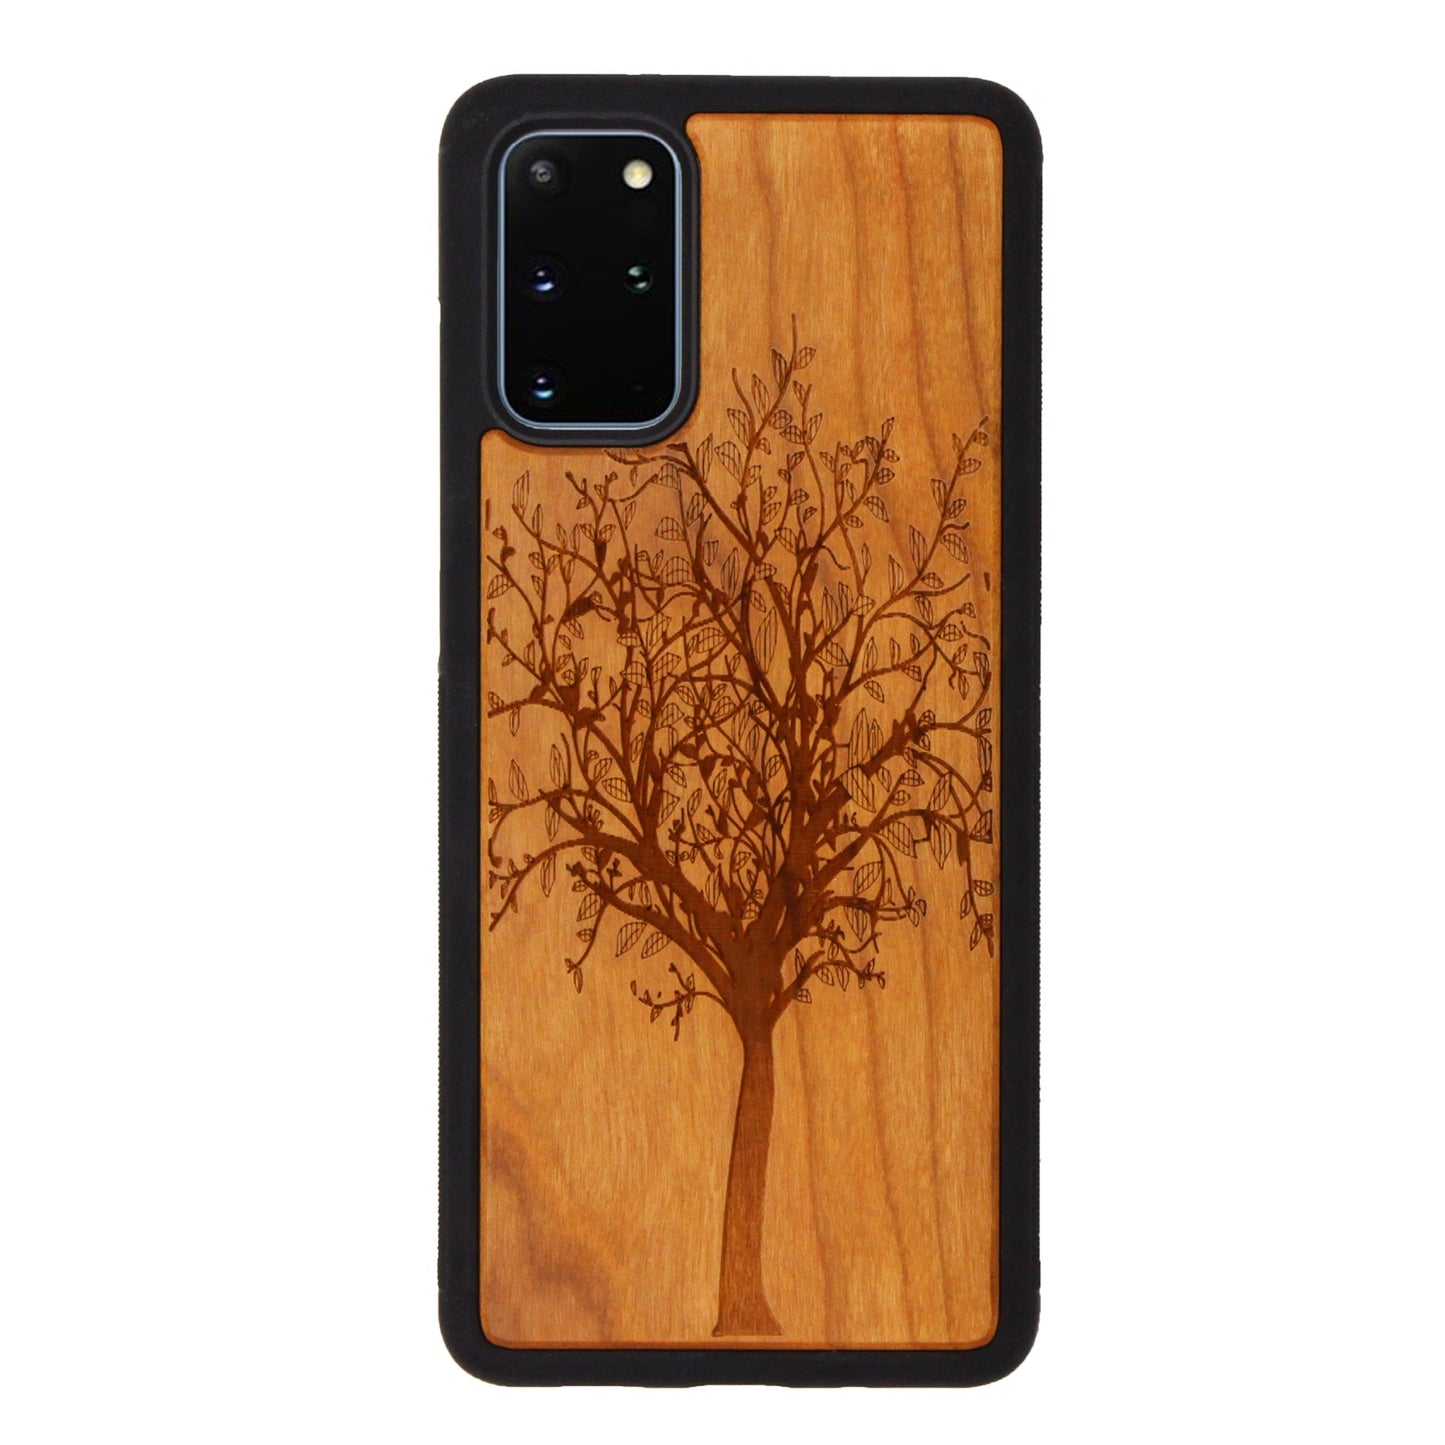 Eden tree of life case made of cherry wood for Samsung Galaxy S20 Plus